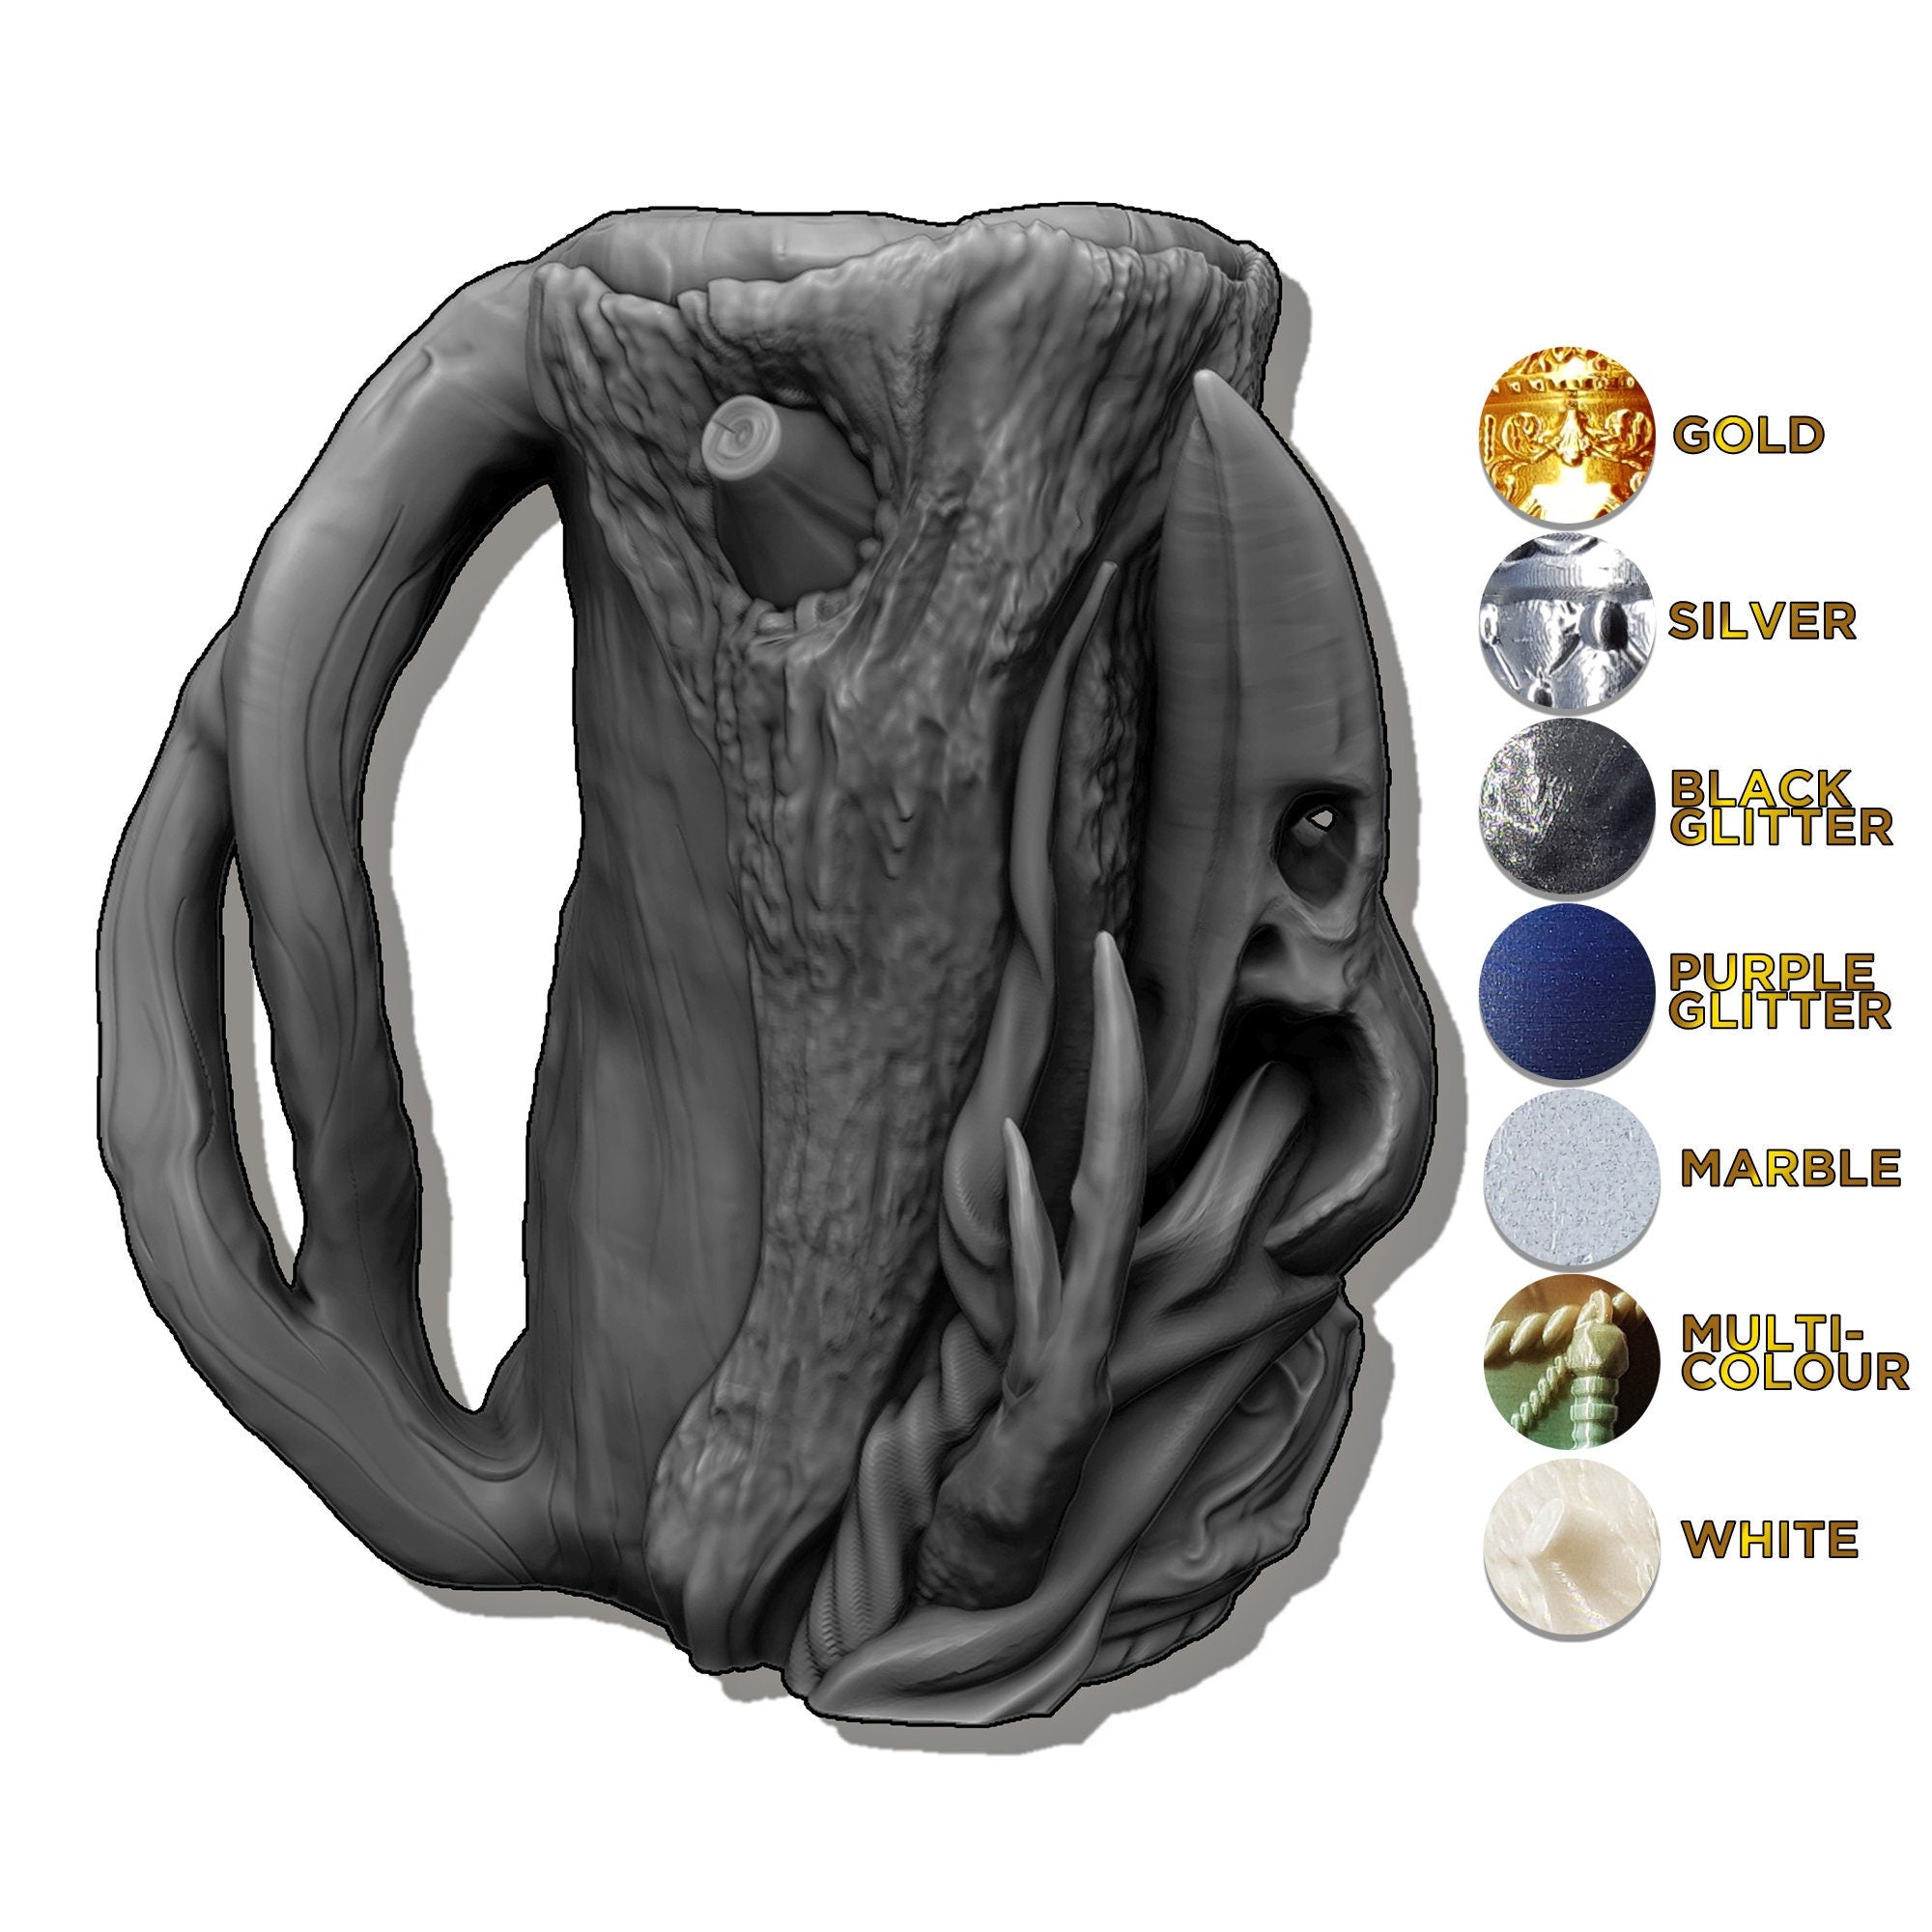 The DRUID | Mythic Mug | Larp | Gaming Zubehör | Tabletop | Dice Cup | Box | Holder | Dungeons and Dragons | DnD | RPG | Fantasy-Role Playing Games